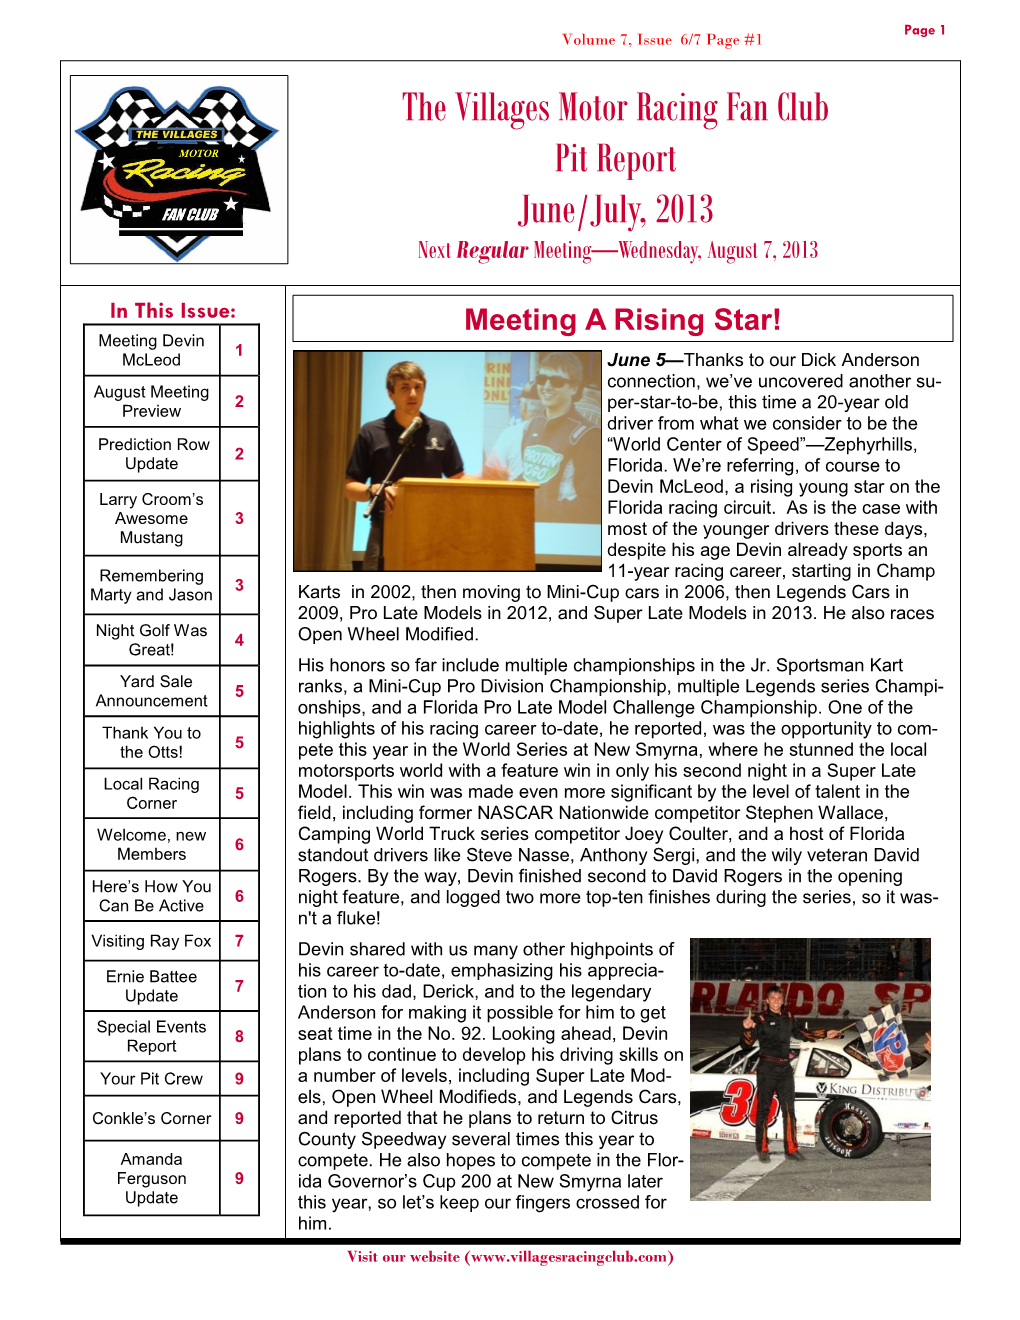 The Villages Motor Racing Fan Club Pit Report June/July, 2013 Next Regular Meeting—Wednesday, August 7, 2013